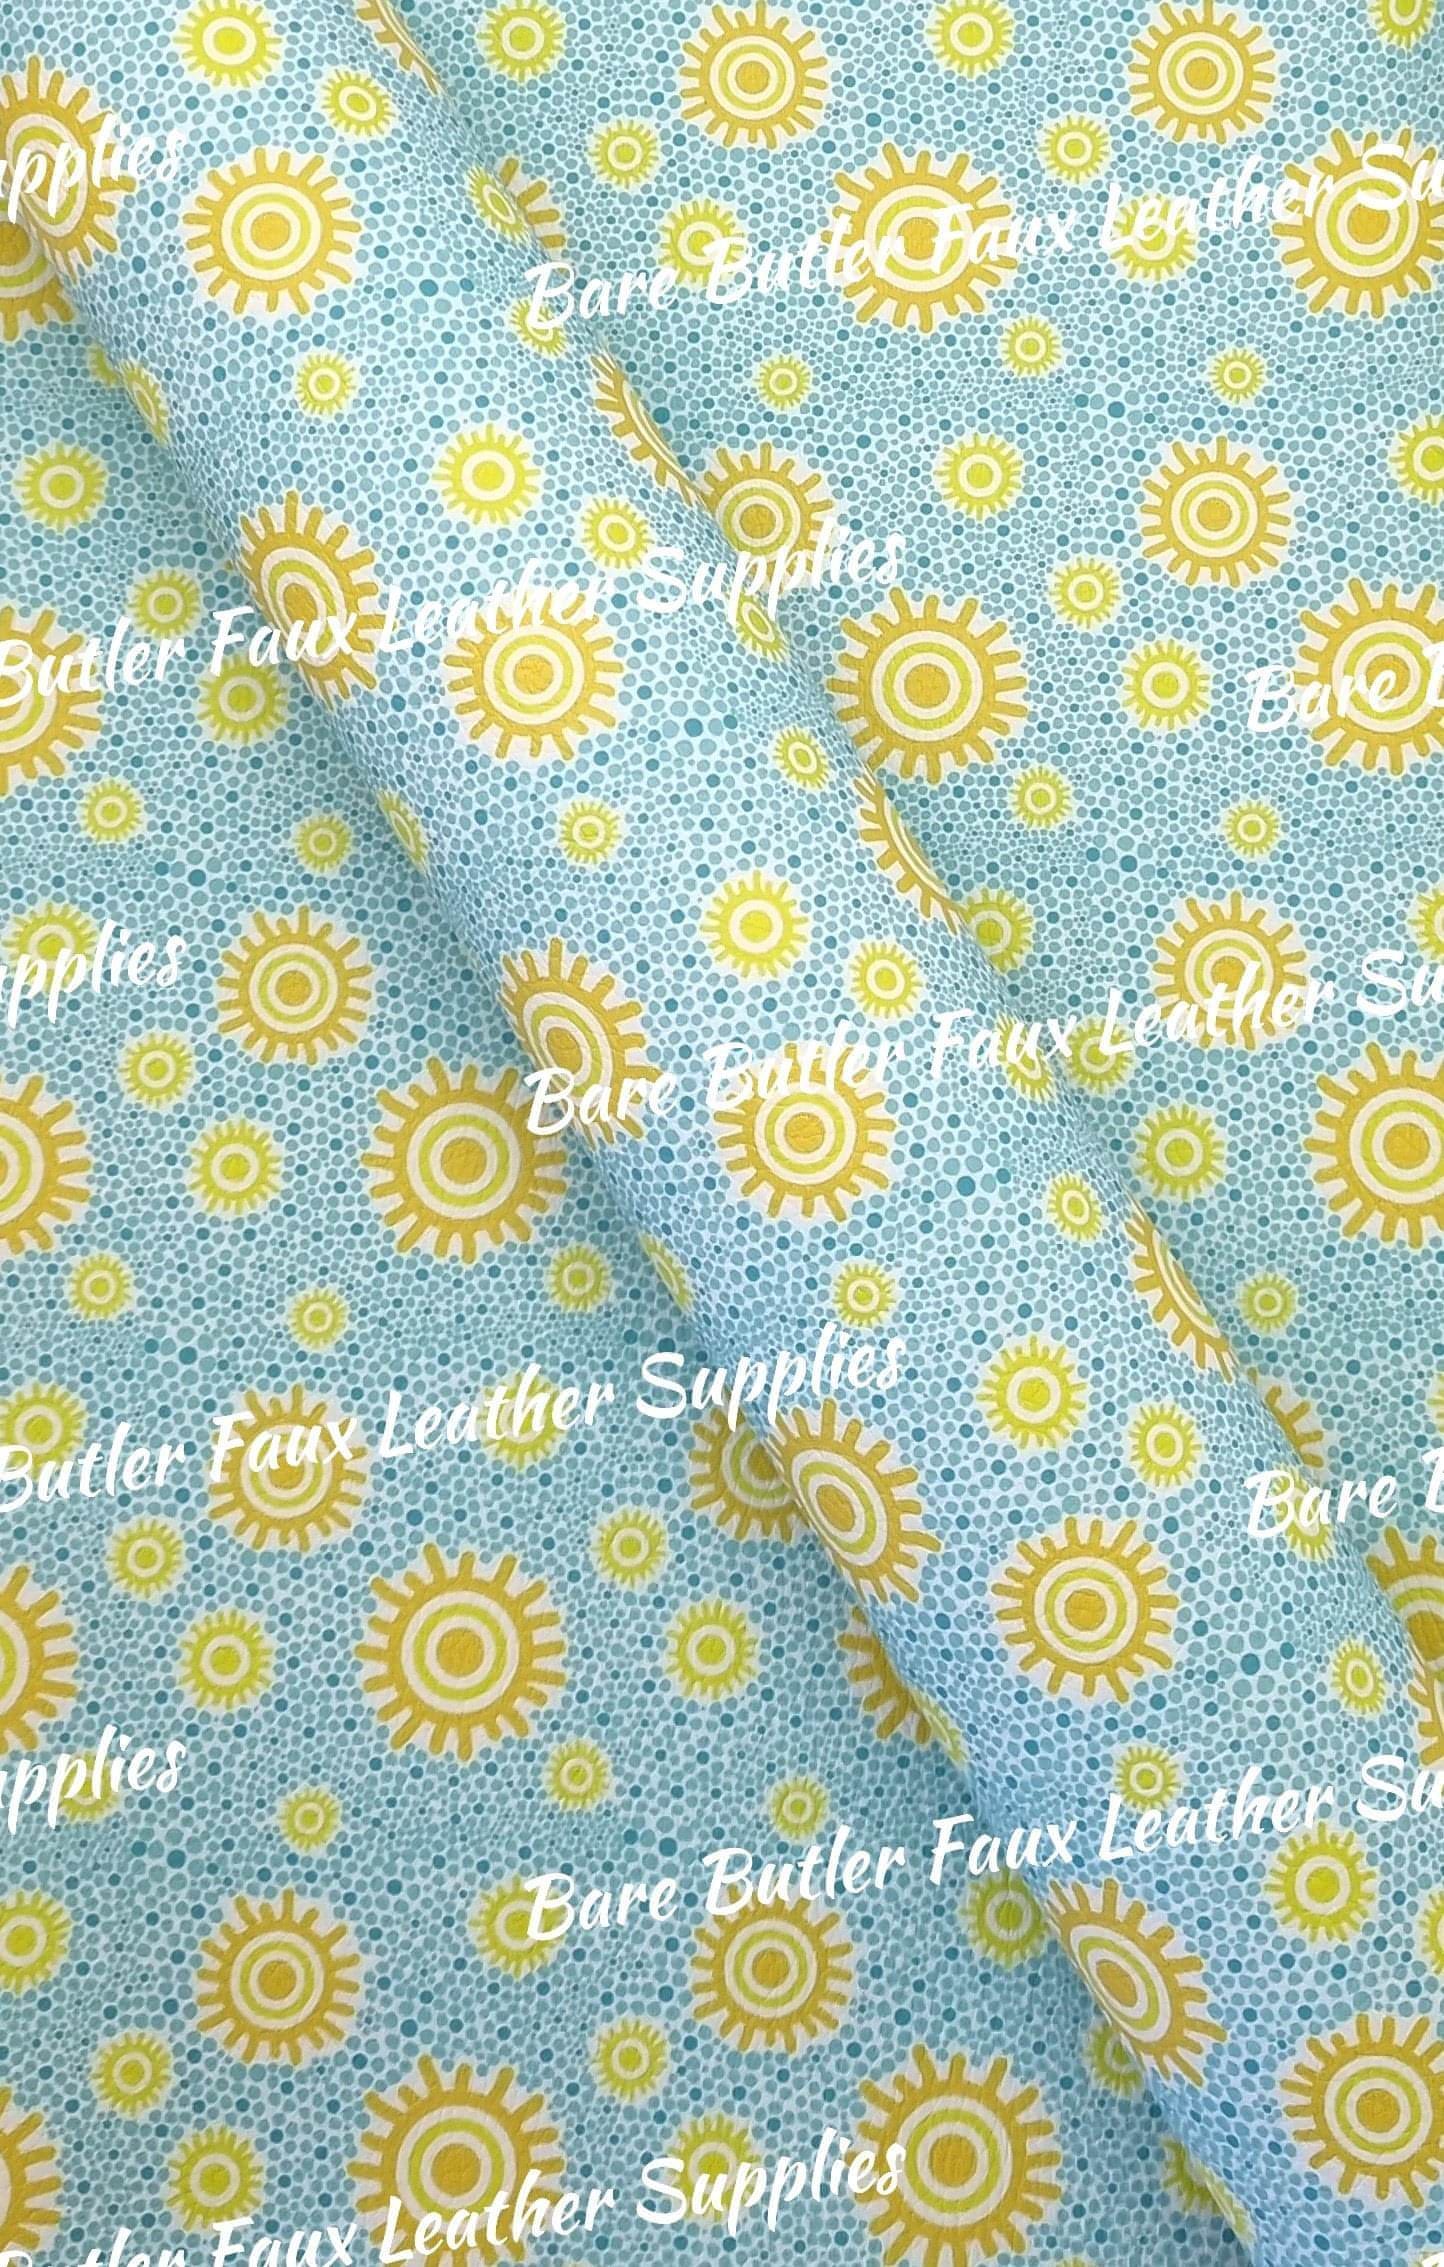 Yellow Sun, Blue Background Litchi - Bare Butler Faux Leather Supplies 